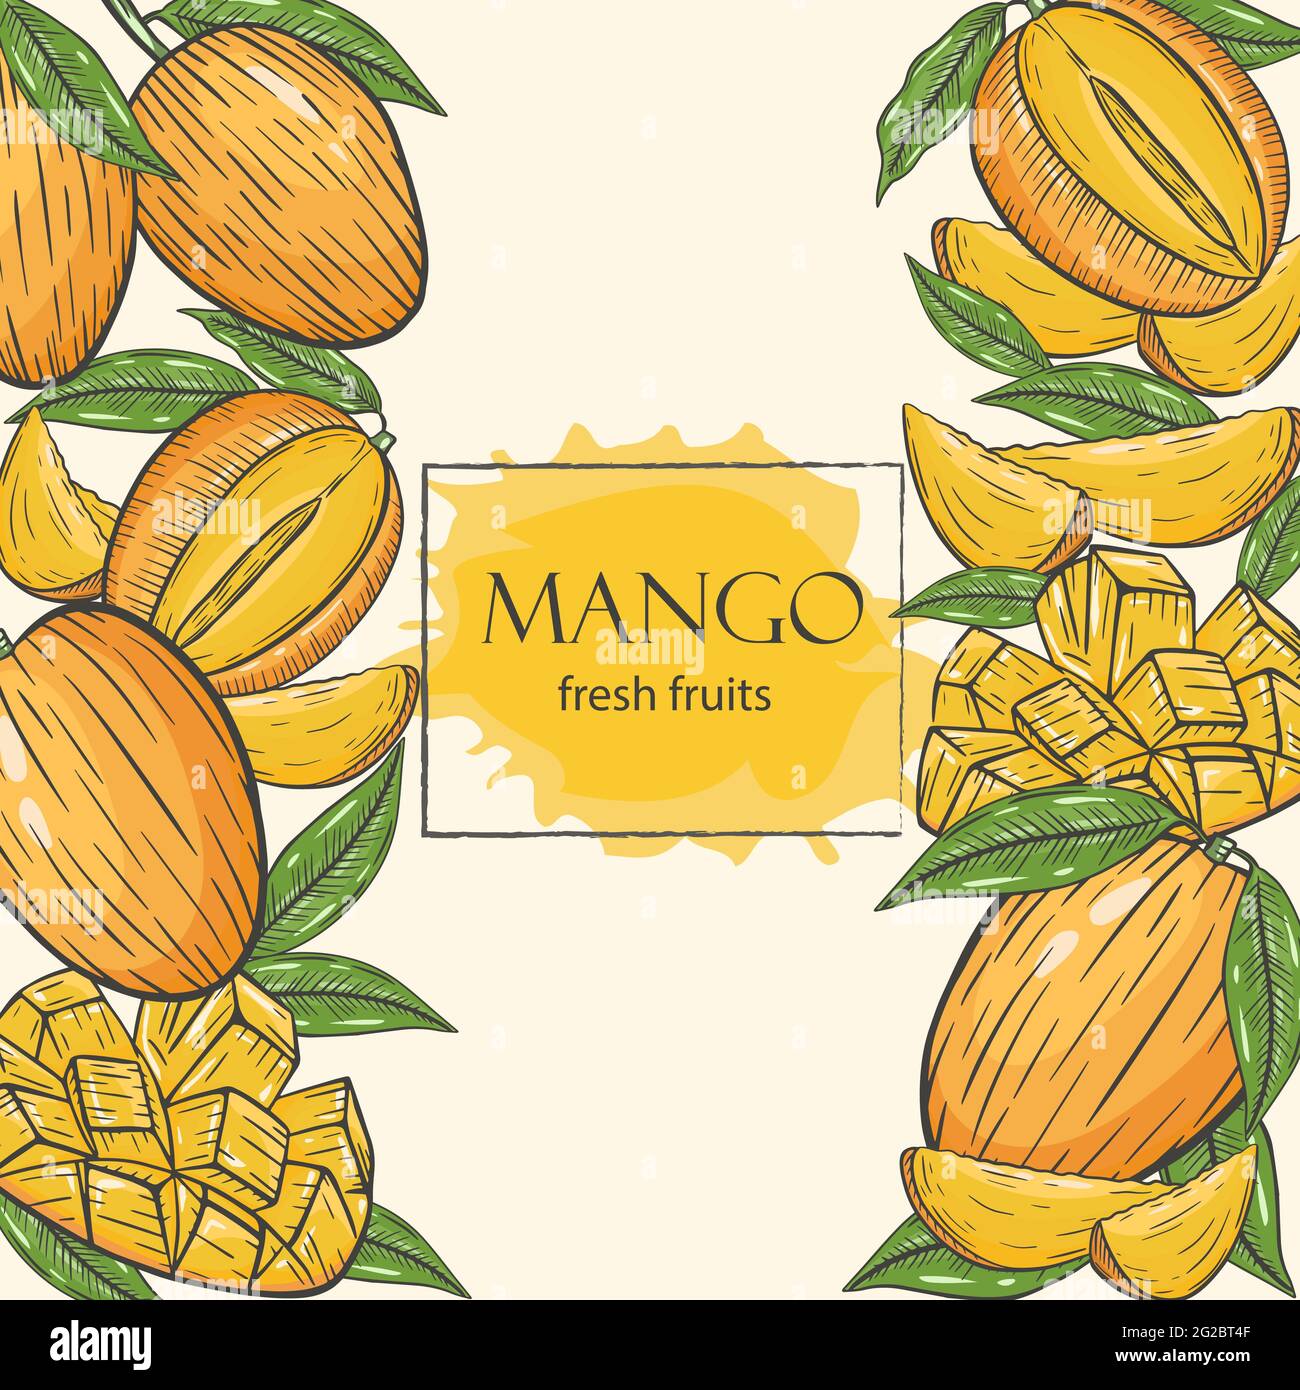 Background with mango, vector illustration. Whole mango, slices and leaves, hand drawing. Frame with exotic tropical yellow fruits. Stock Vector